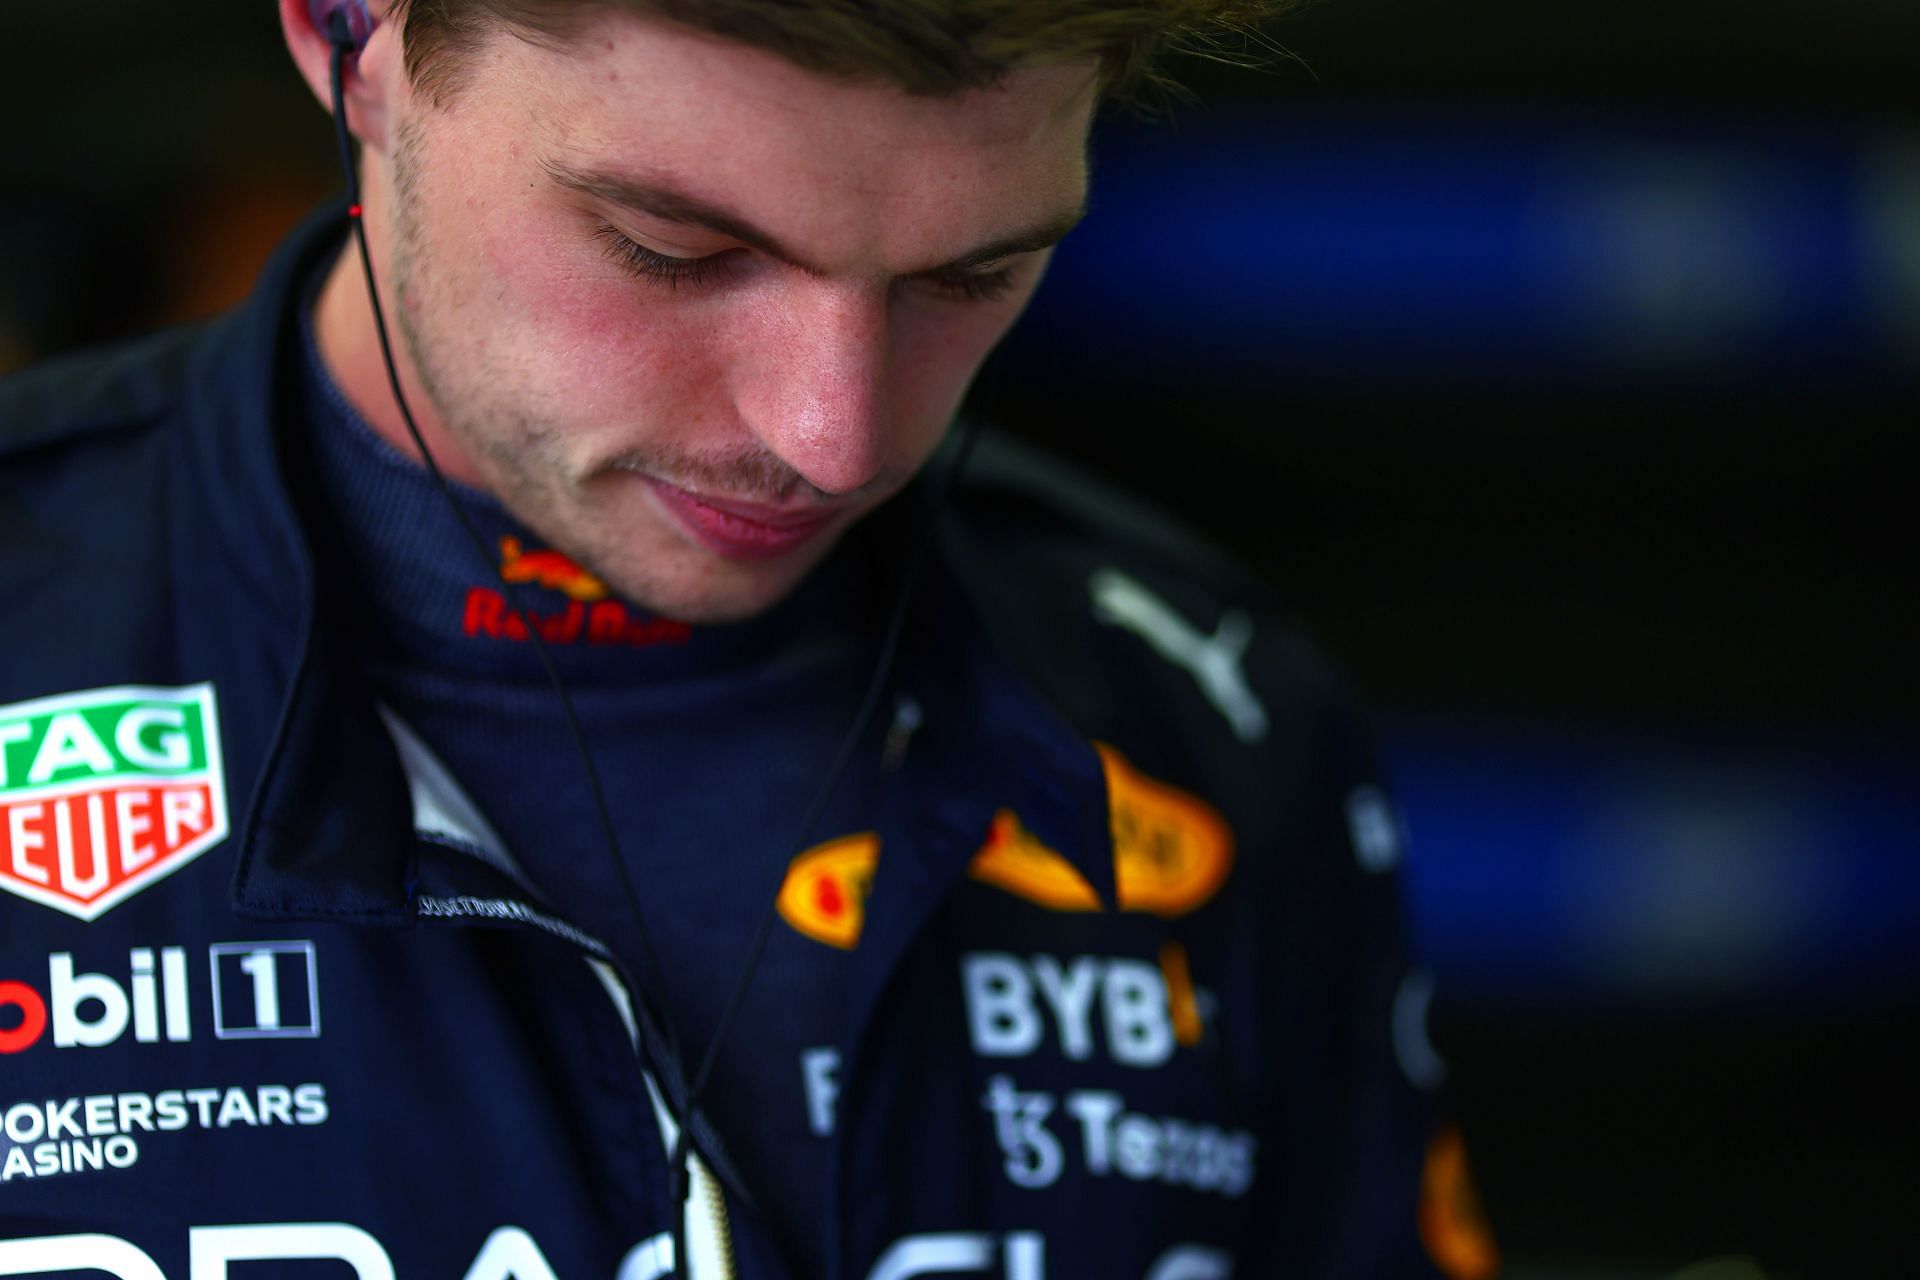 Max Verstappen prepares in the garage before qualifying ahead of the F1 Grand Prix of Great Britain at Silverstone on July 02, 2022, in Northampton, England (Photo by Mark Thompson/Getty Images)